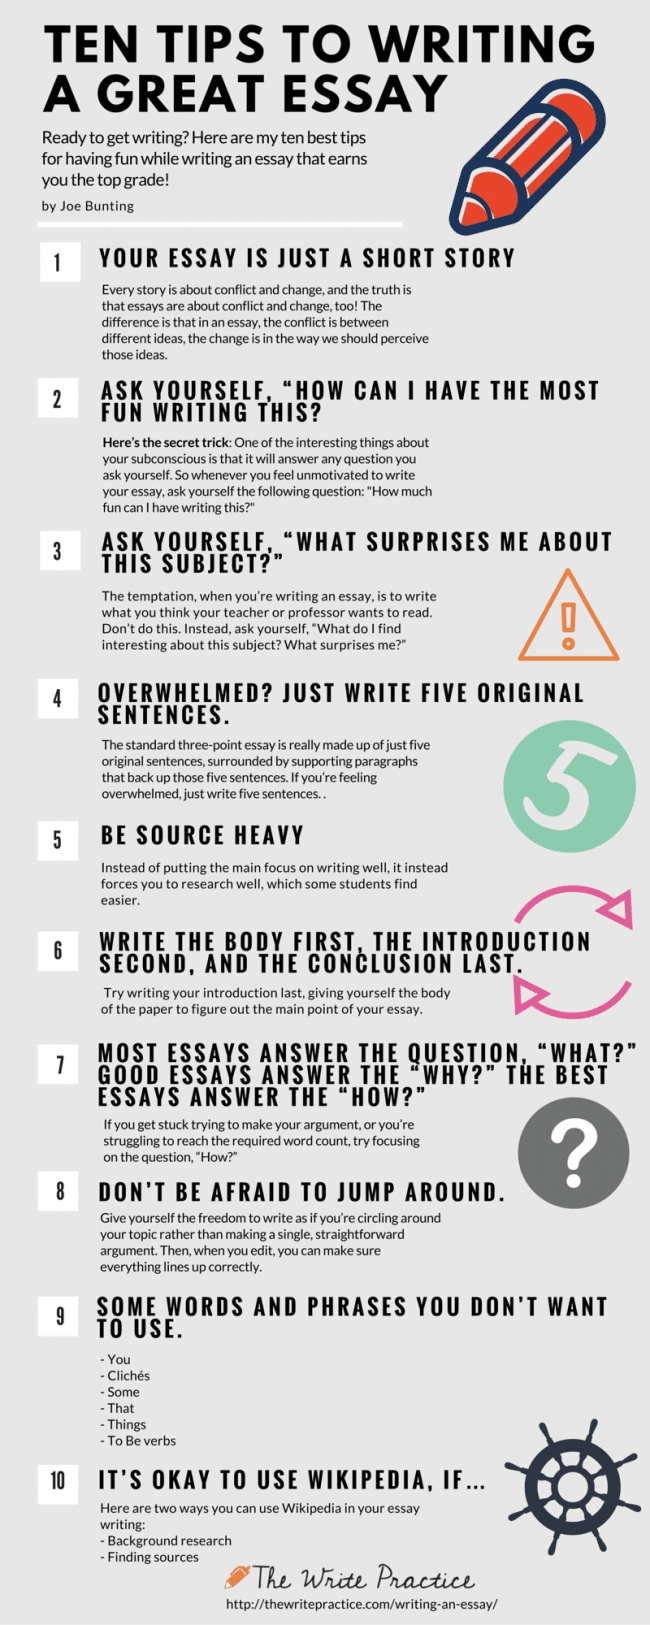 10 Tips for Writing an Essay